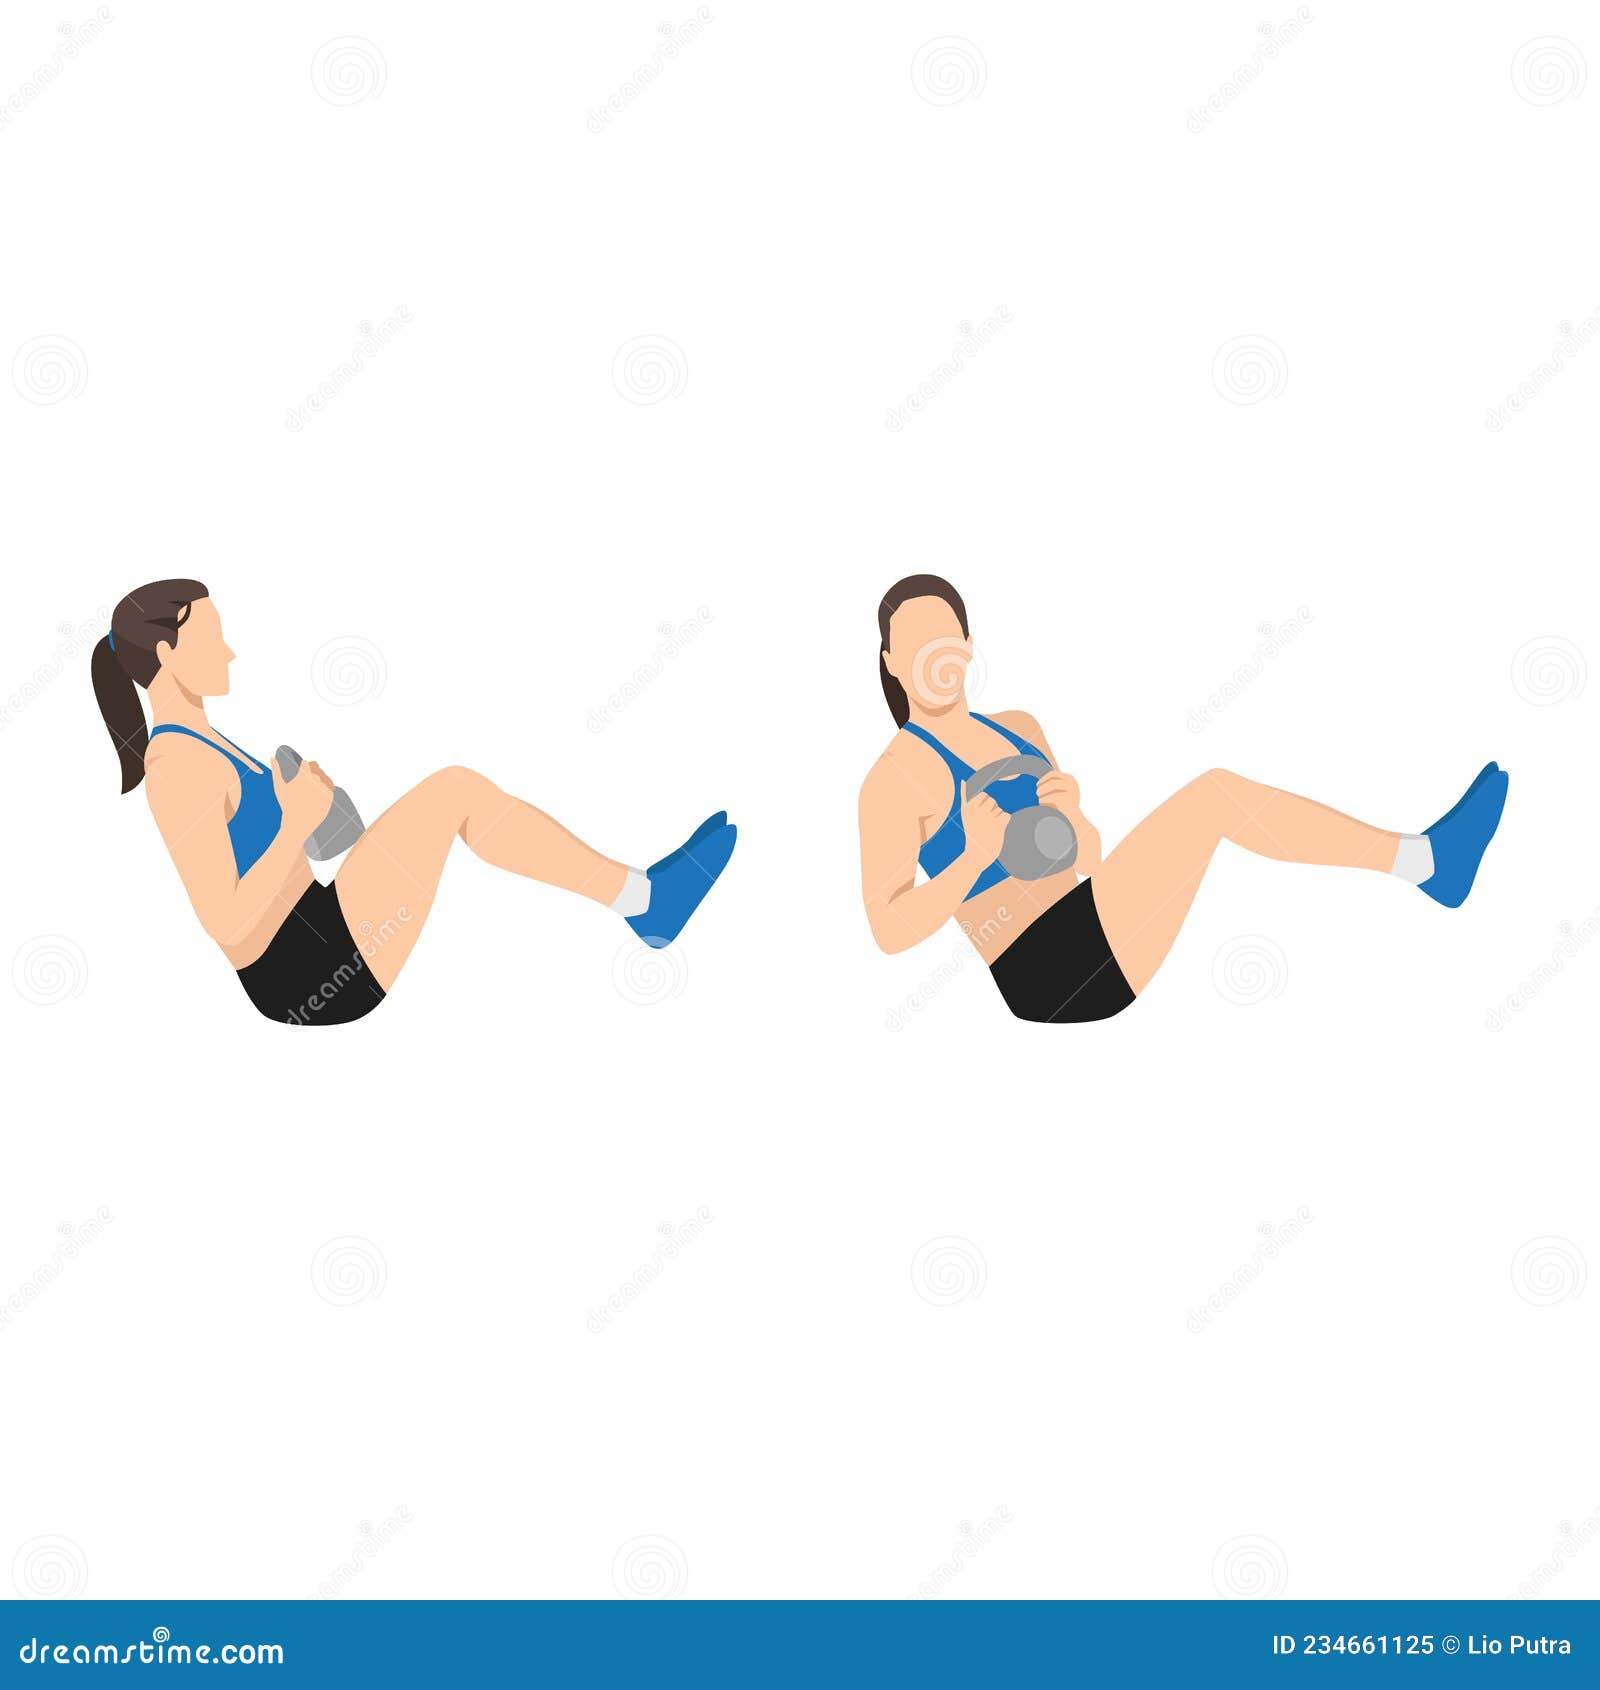 woman doing kettlebell russian twist exercise.